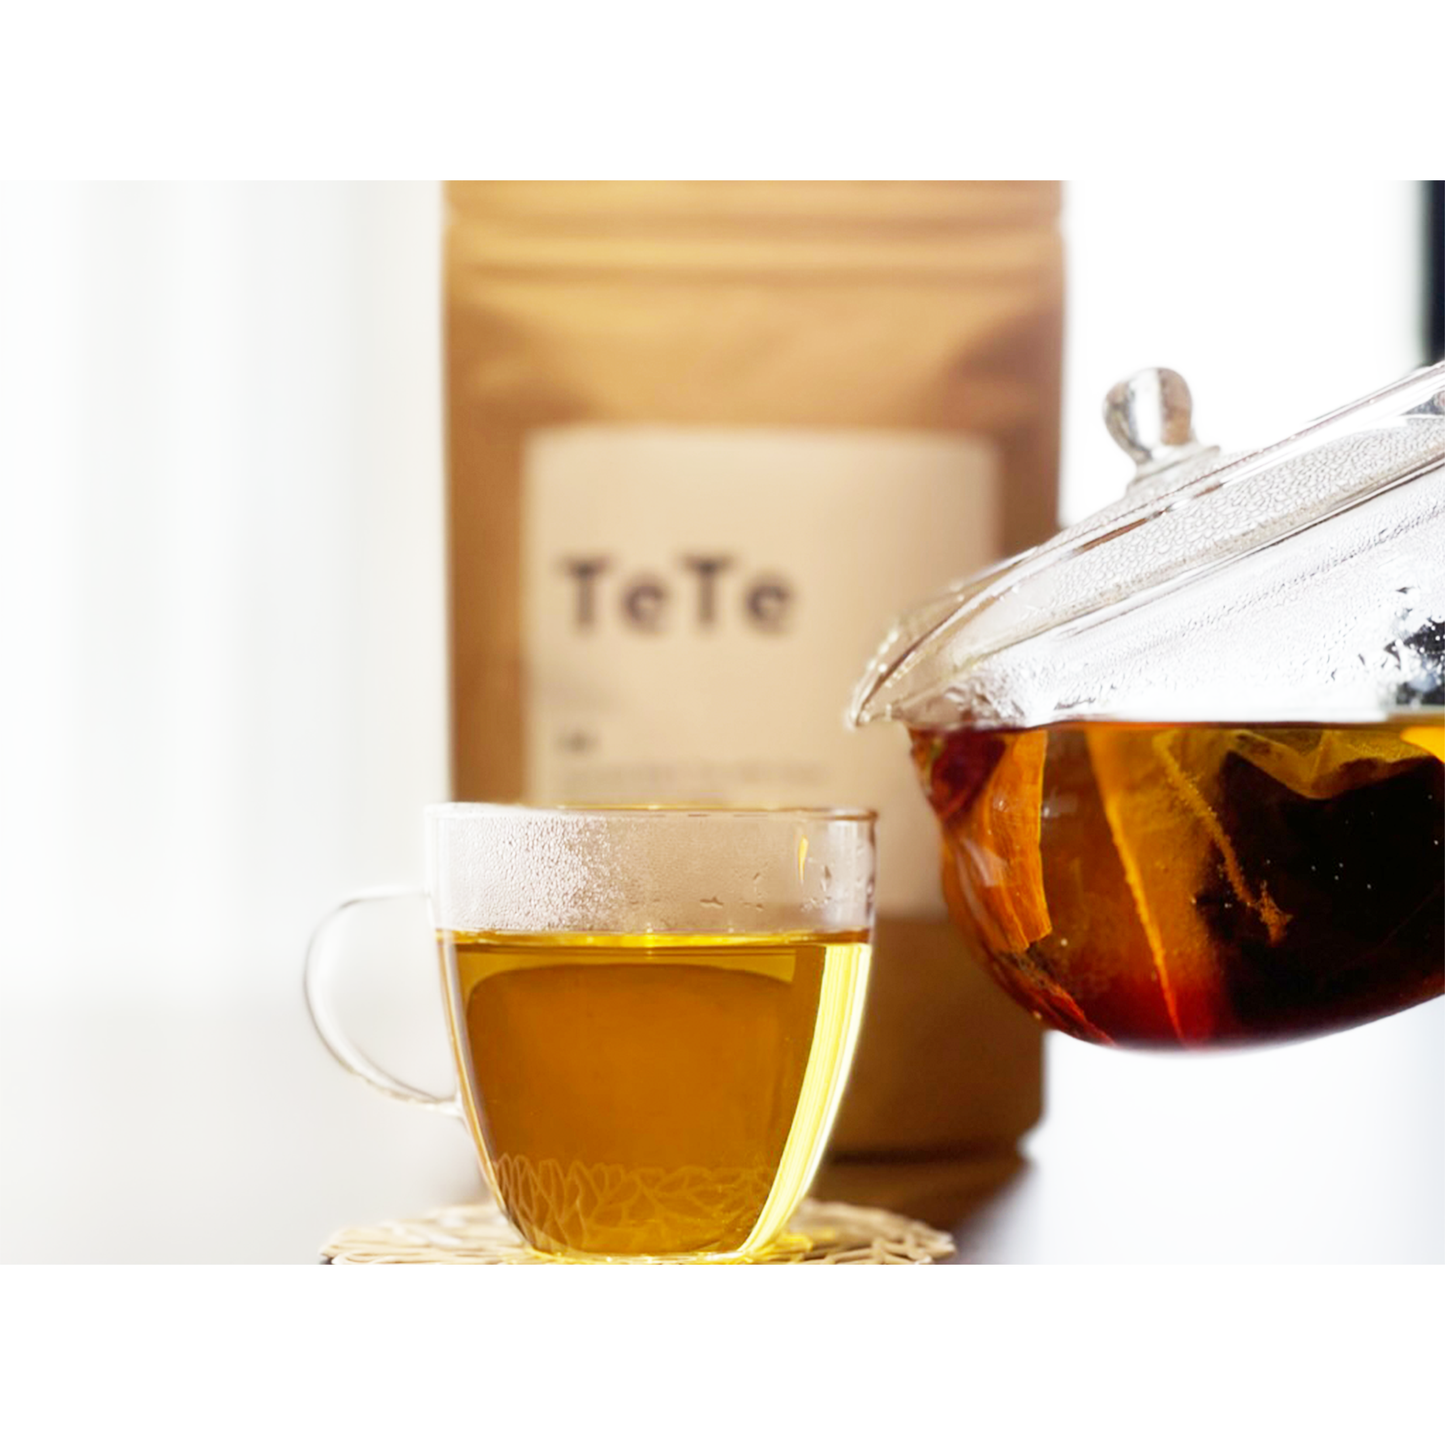 TeTe #4 Japanese black tea with Clove（和紅茶×クローブ）